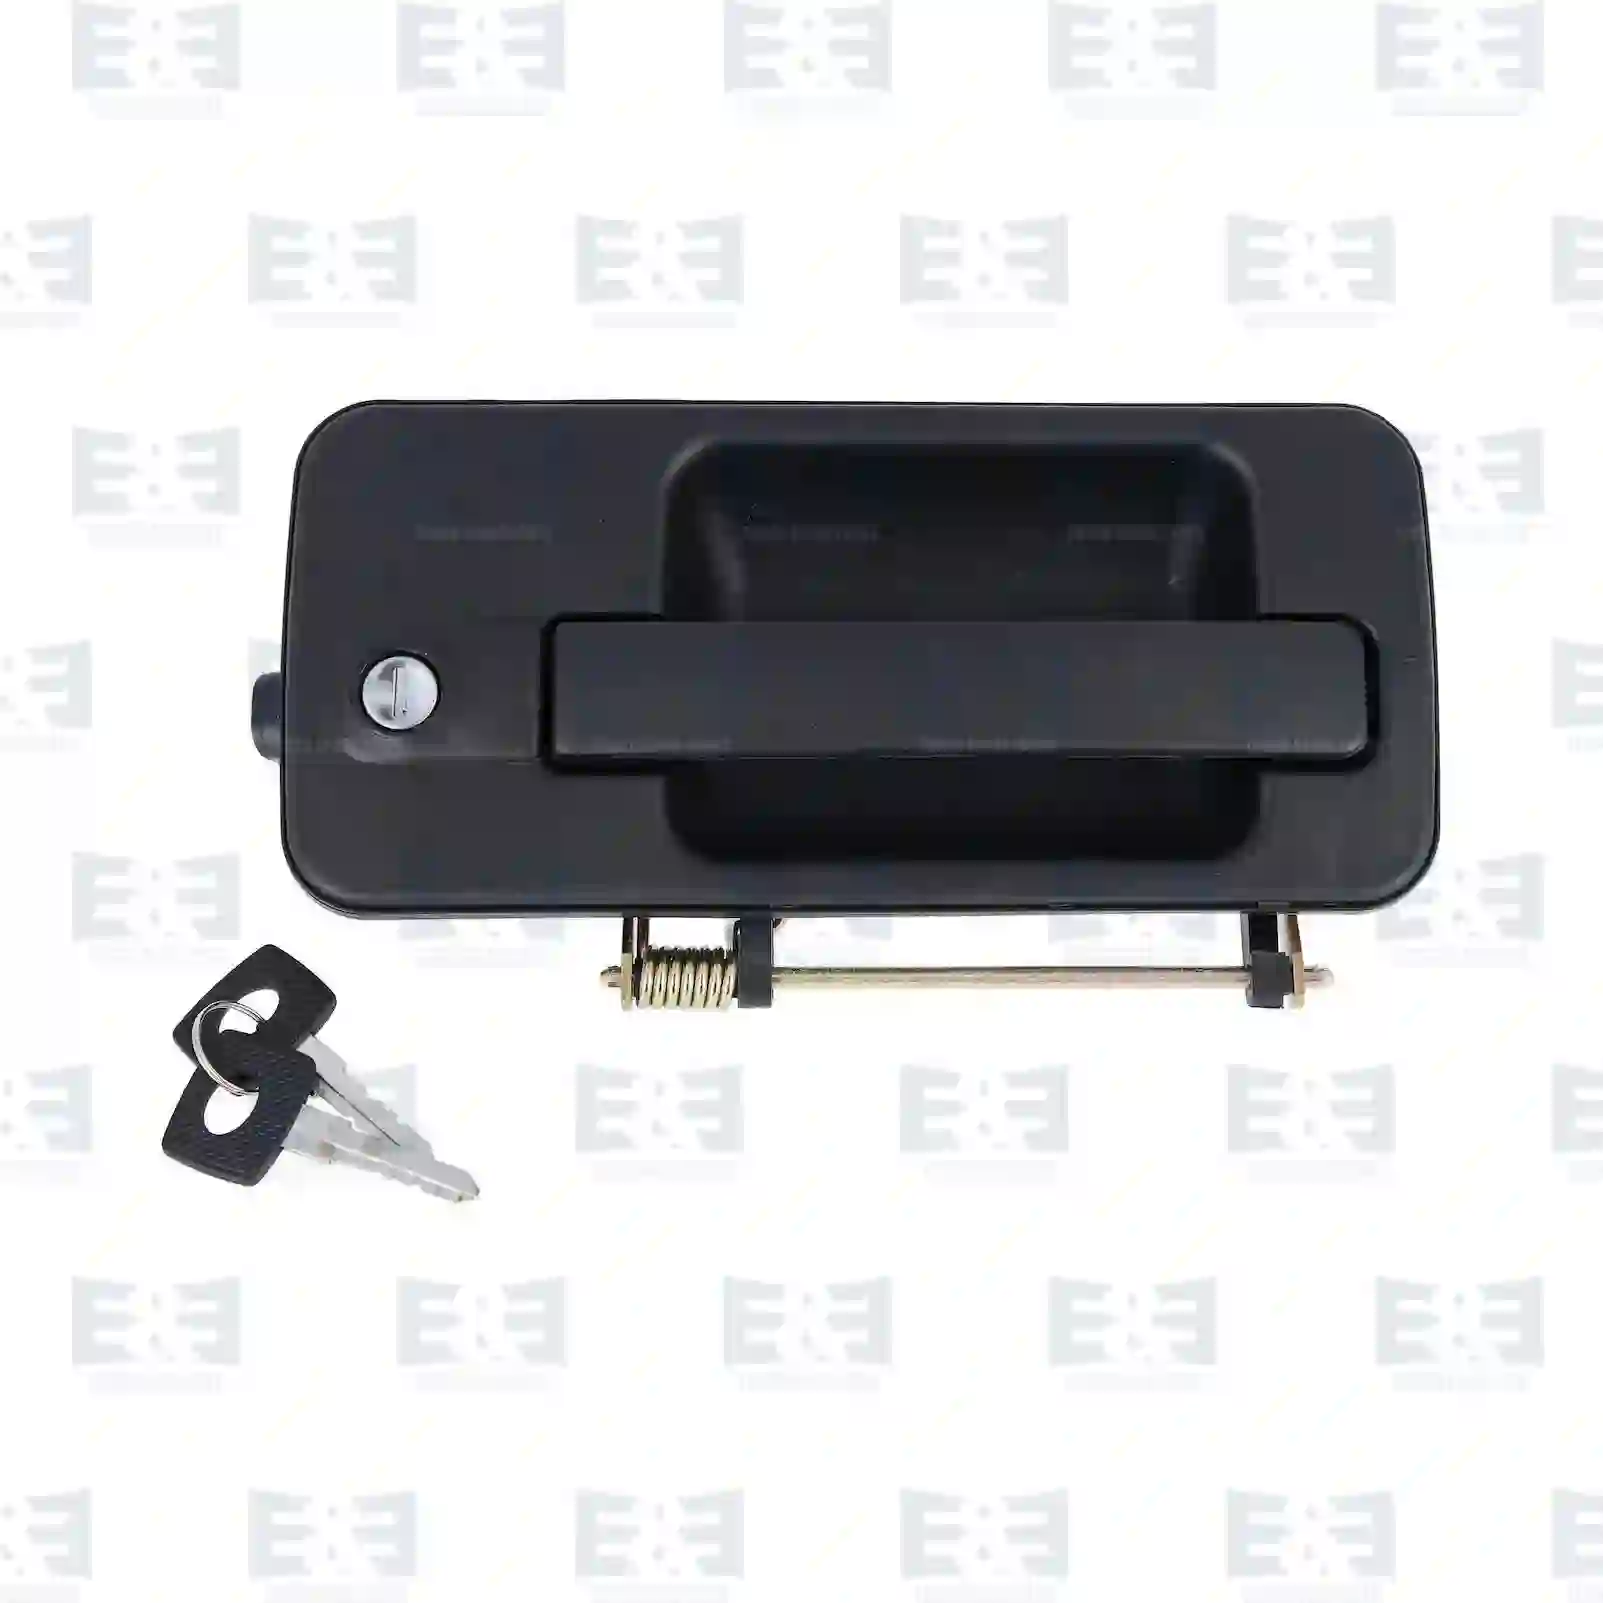 Door handle, right, complete with lock cylinder, 2E2292157, 9417600559S, ZG60604-0008 ||  2E2292157 E&E Truck Spare Parts | Truck Spare Parts, Auotomotive Spare Parts Door handle, right, complete with lock cylinder, 2E2292157, 9417600559S, ZG60604-0008 ||  2E2292157 E&E Truck Spare Parts | Truck Spare Parts, Auotomotive Spare Parts